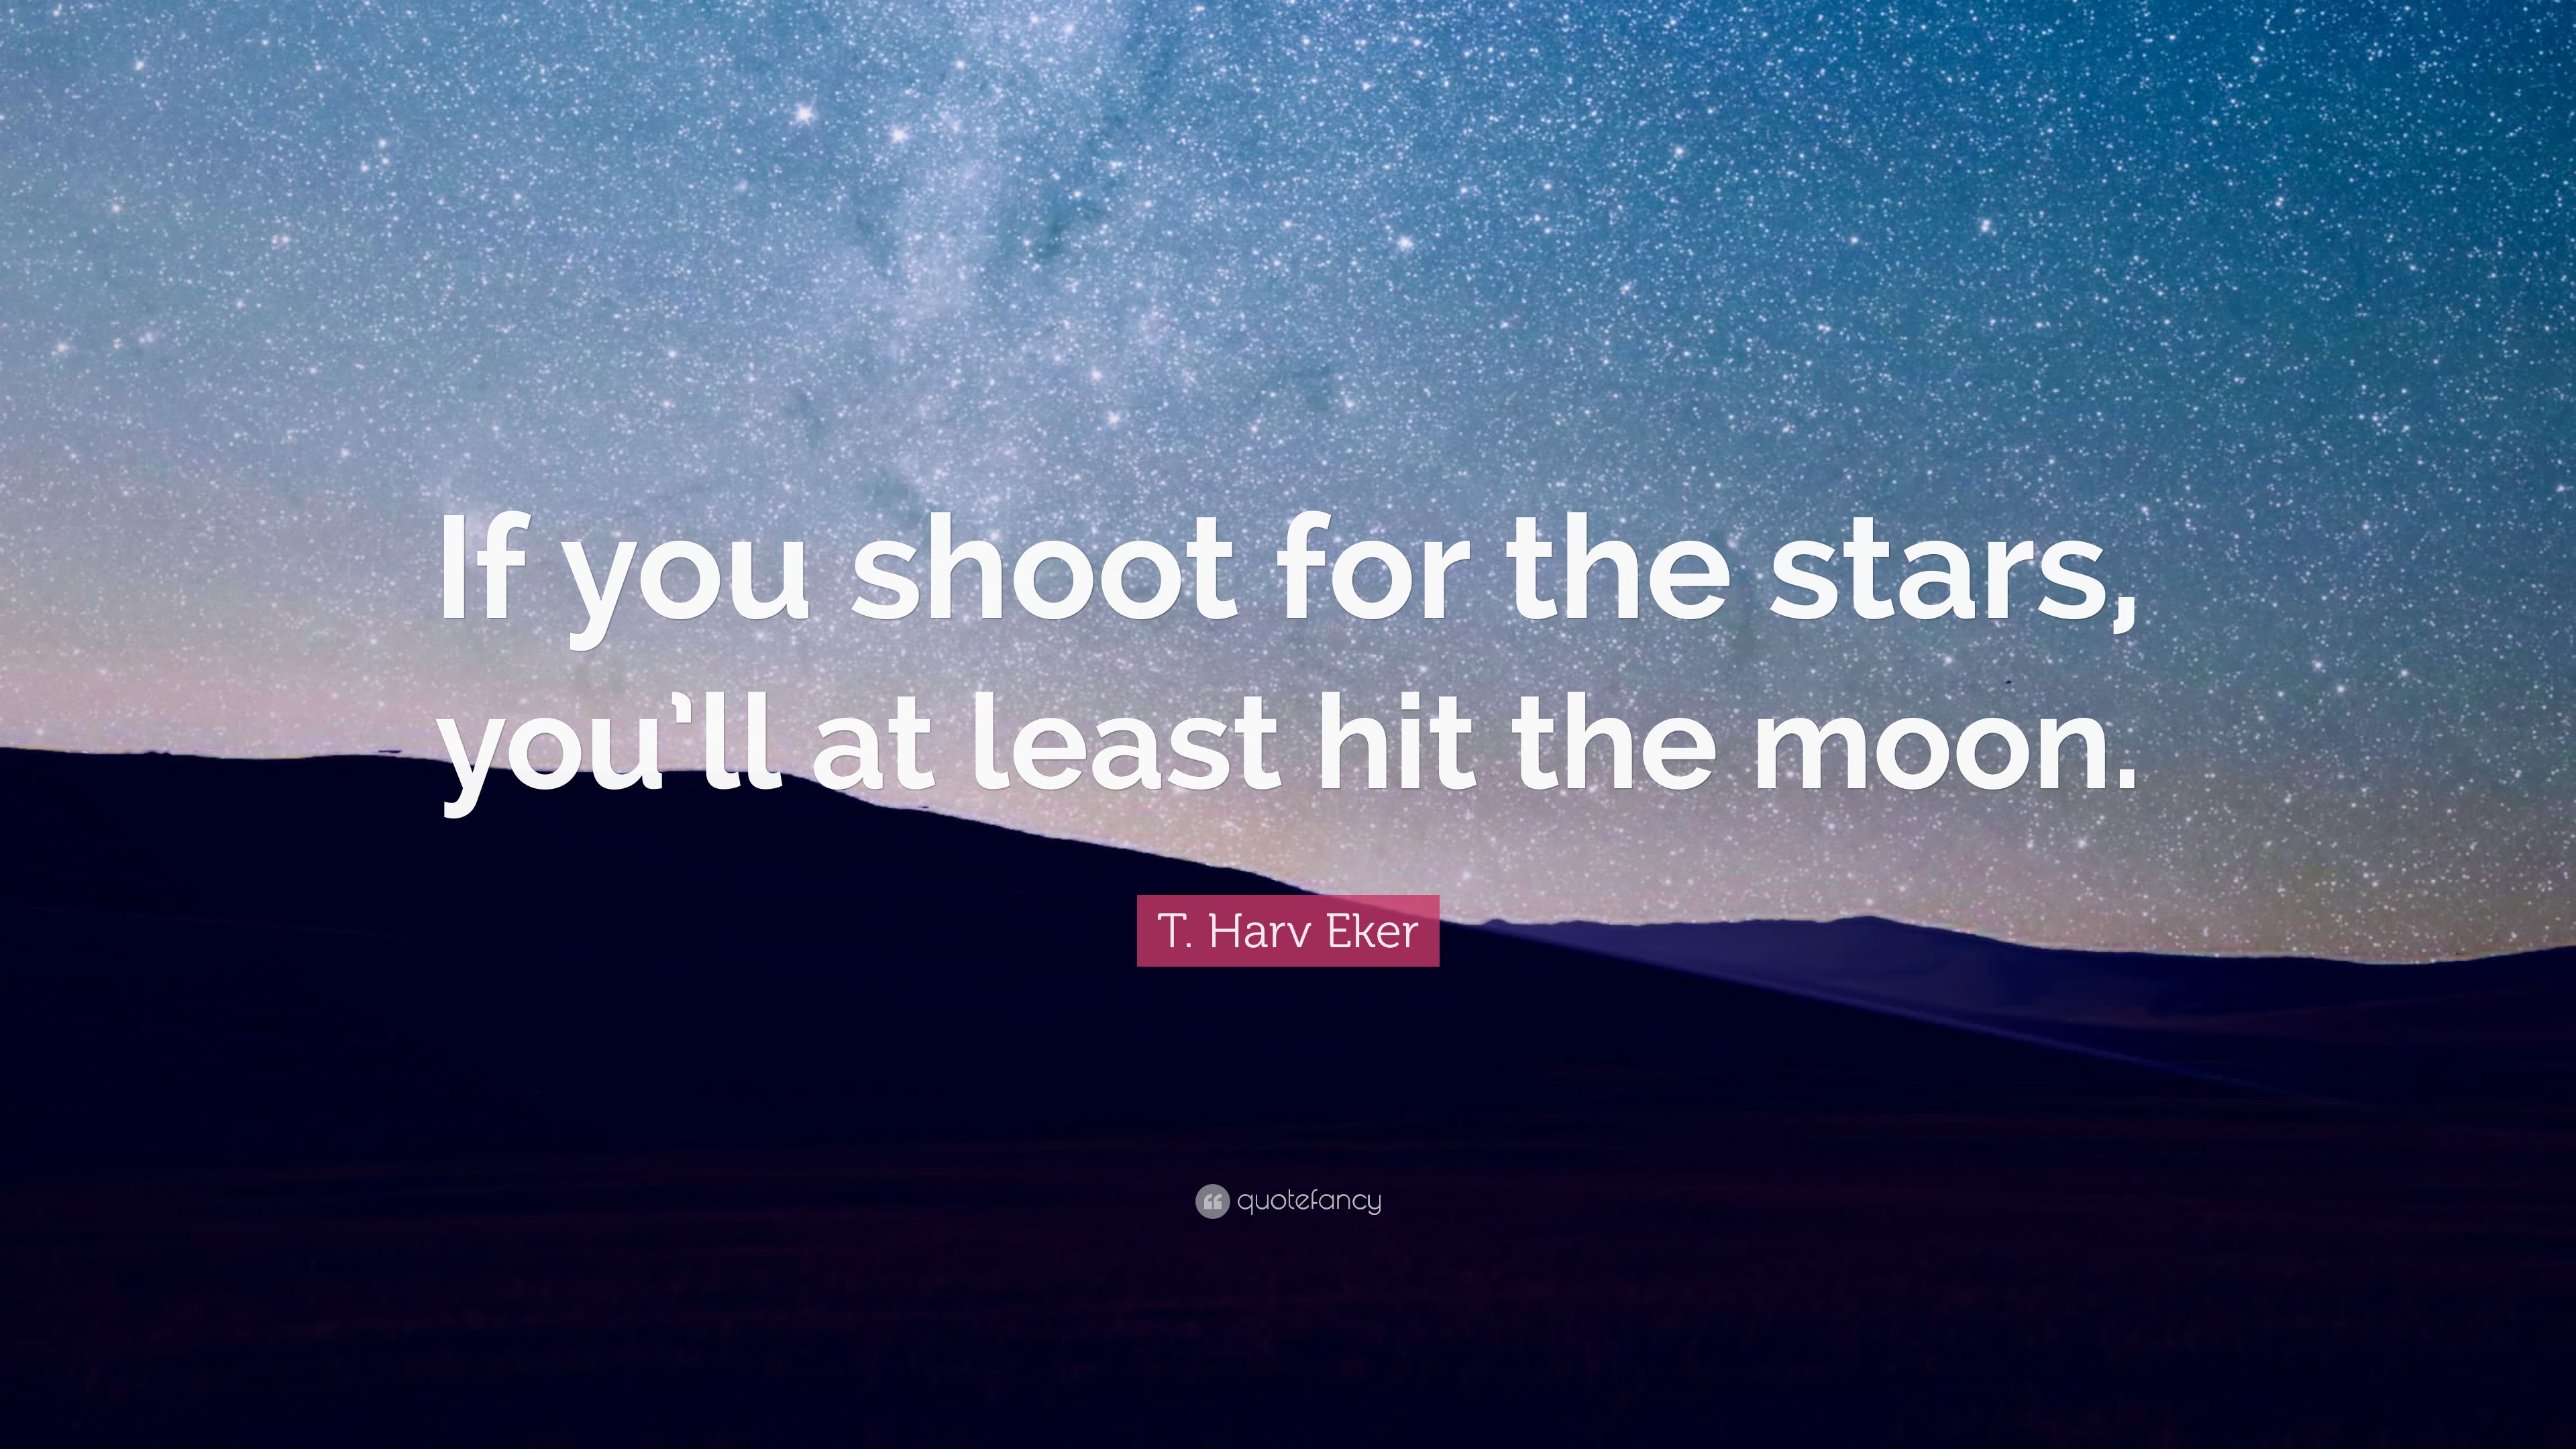 T. Harv Eker Quote: “If you shoot for the stars, you'll at least hit the moon.” (9 wallpaper)